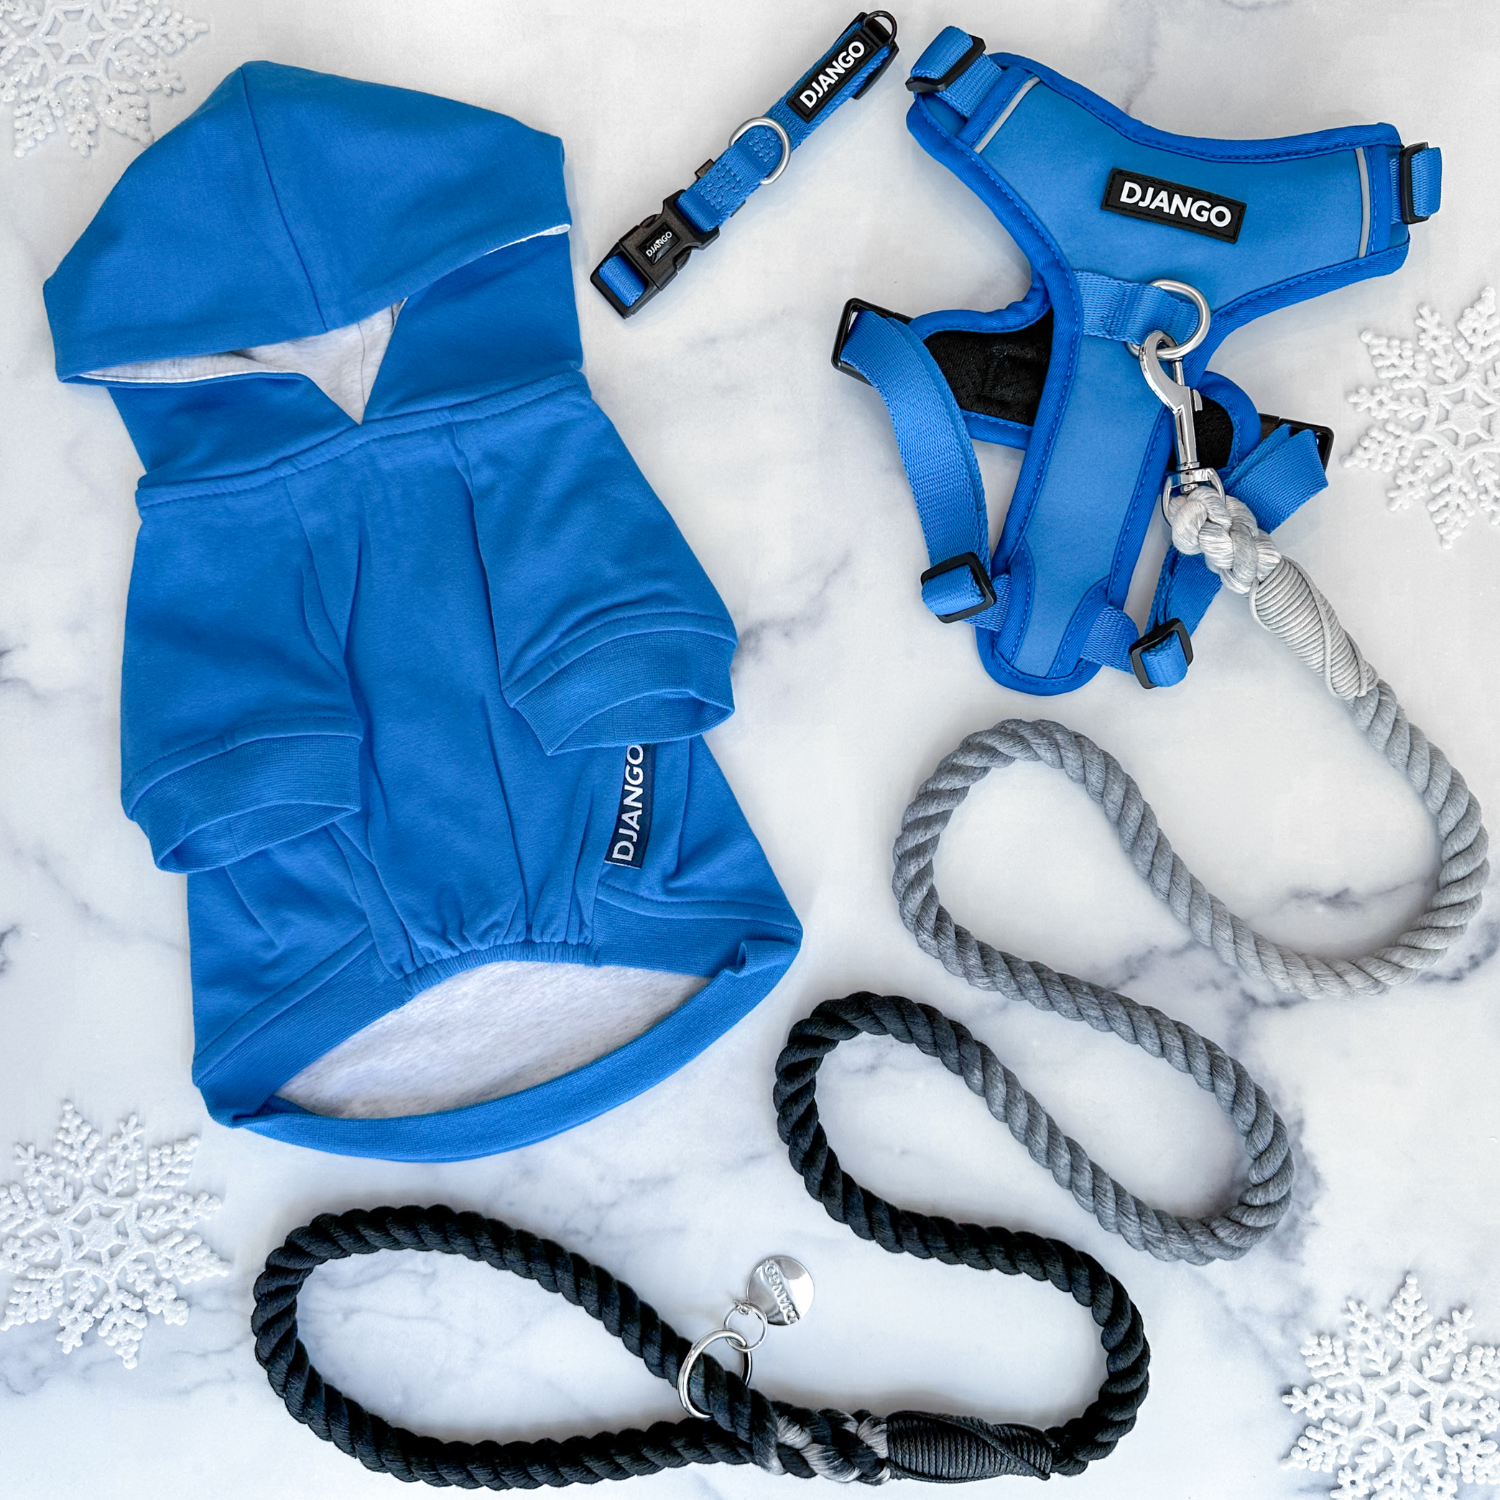 Pair your favorite DJANGO dog hoodie with your favorite DJANGO harness, collar, and leash set! DJANGO's super soft dog hoodie in Alpine Blue pairs perfectly with the Tahoe No Pull Dog Harness and Dog Collar in Alpine Blue. Add extra style with the Poppy Seed Gray cotton rope dog leash. - djangobrand.com